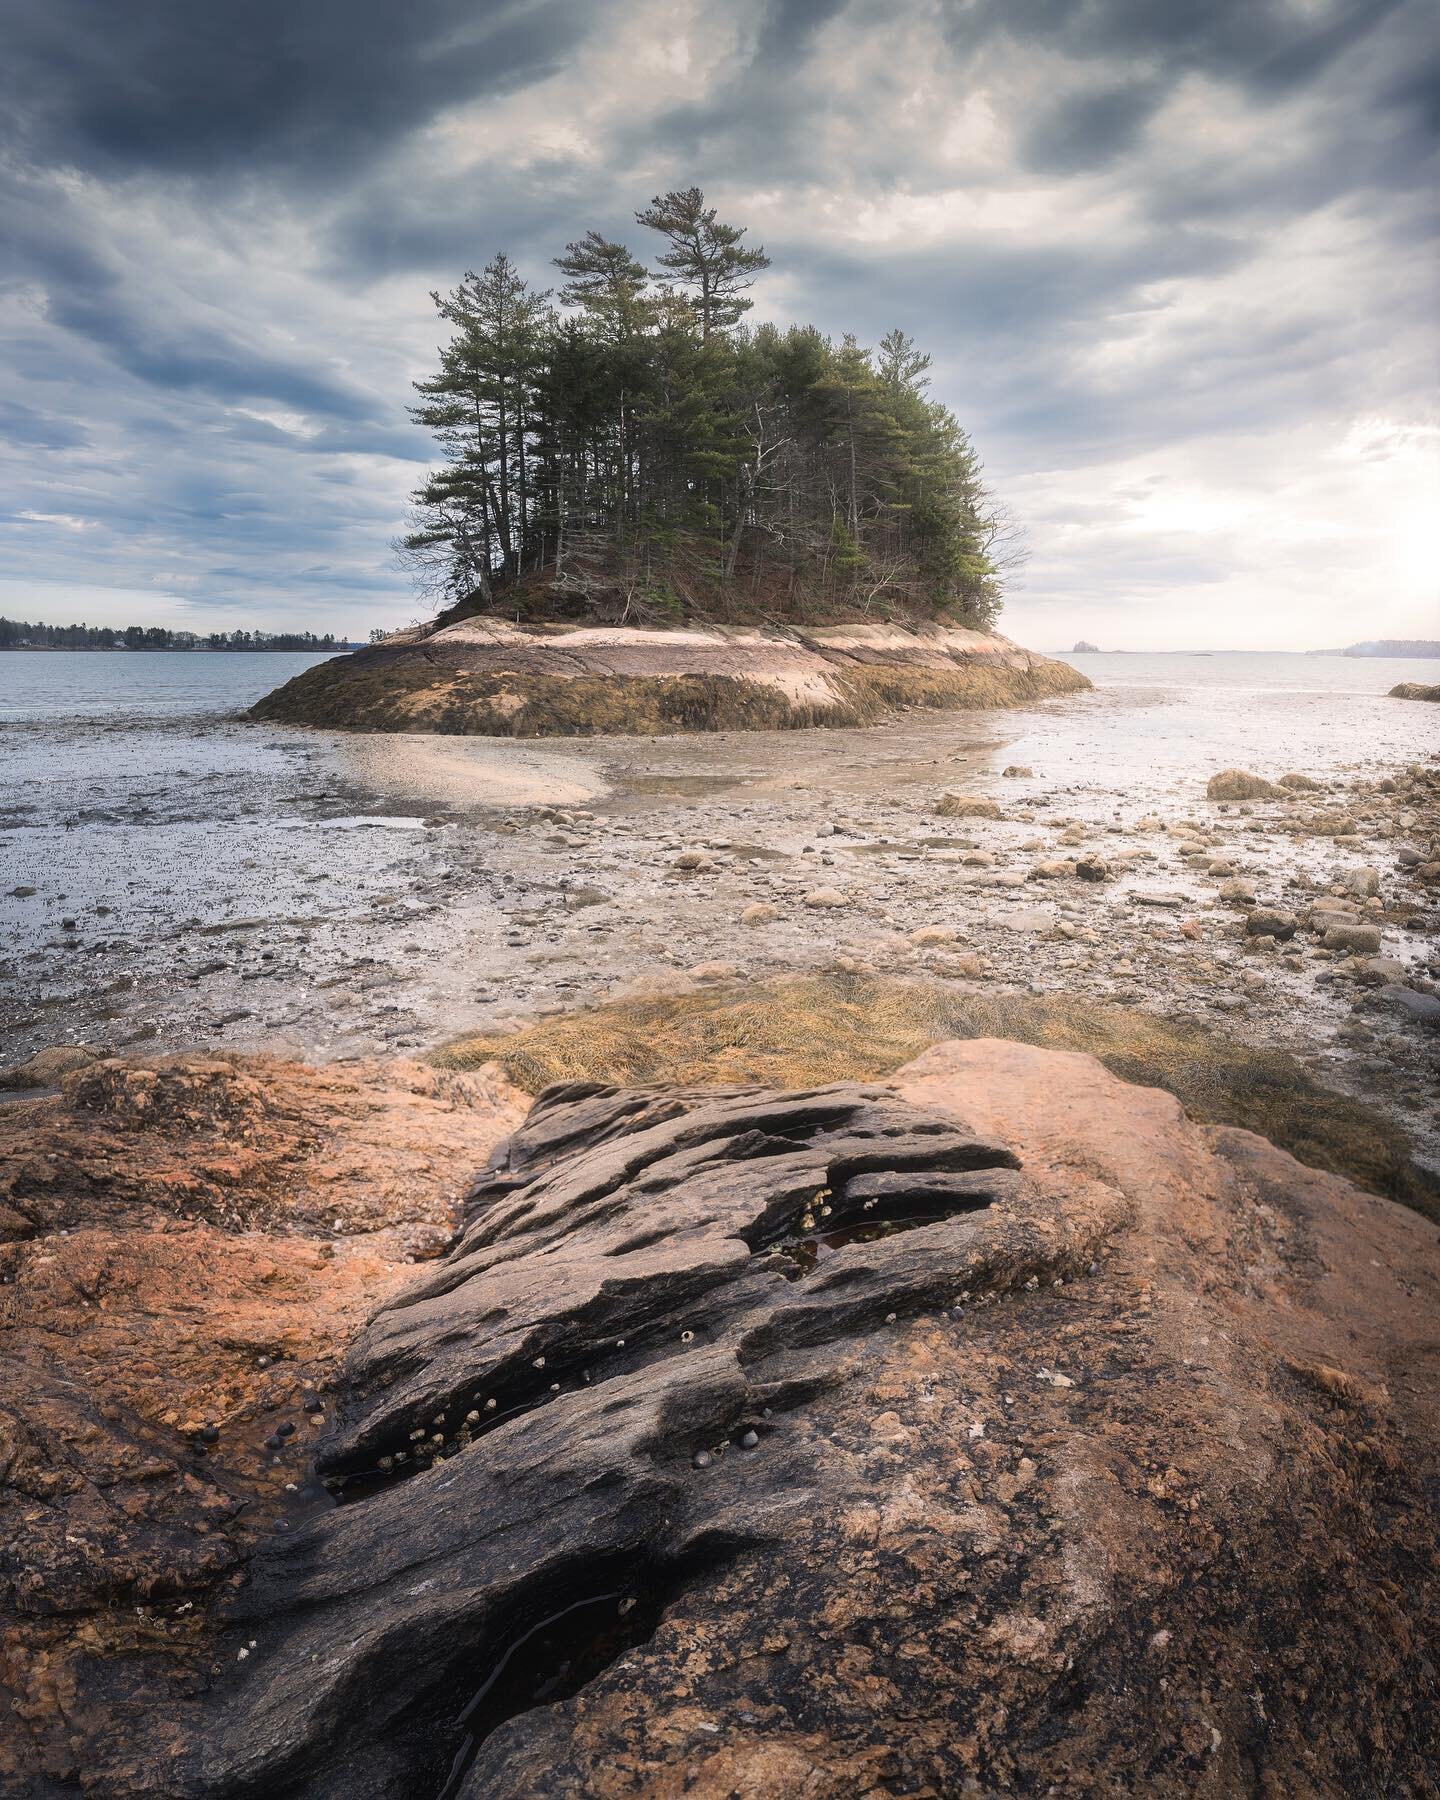 Just a stop along the way to Acadia.  Met up with @brandonbaer_ and @eberry_photography at Wolfe&rsquo;s Neck State Park.  @manbythesea popped in for a bit too!  Maine has a special coast line but cooler photography friends.